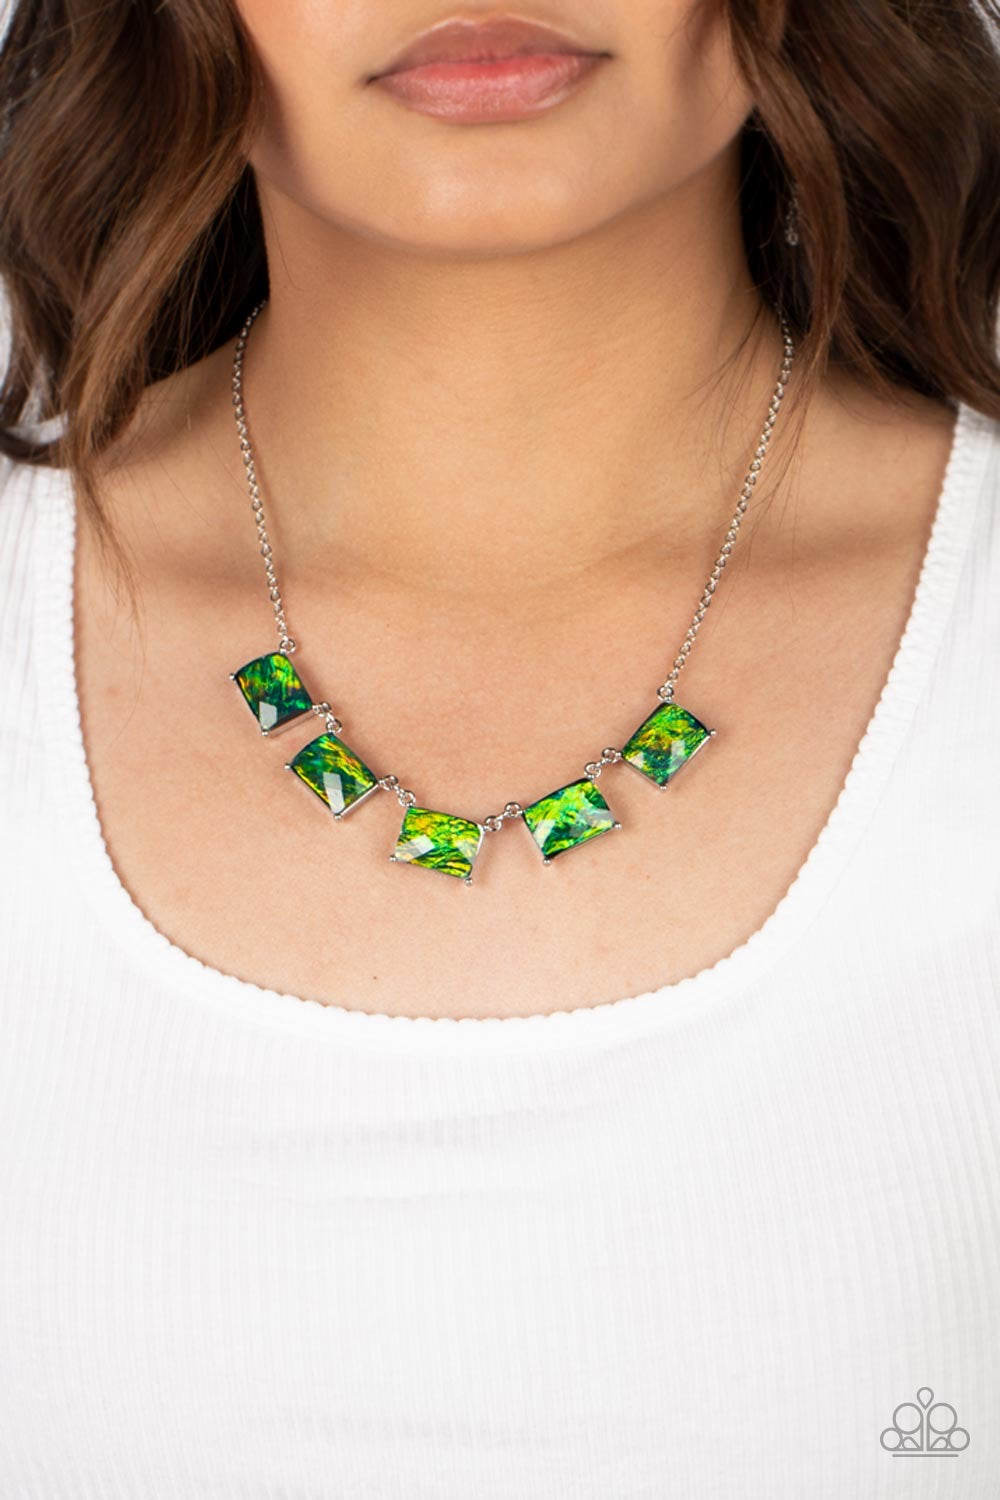 Paparazzi Opalescent Oblivion - Green Necklace -paparazzi jewelry images 